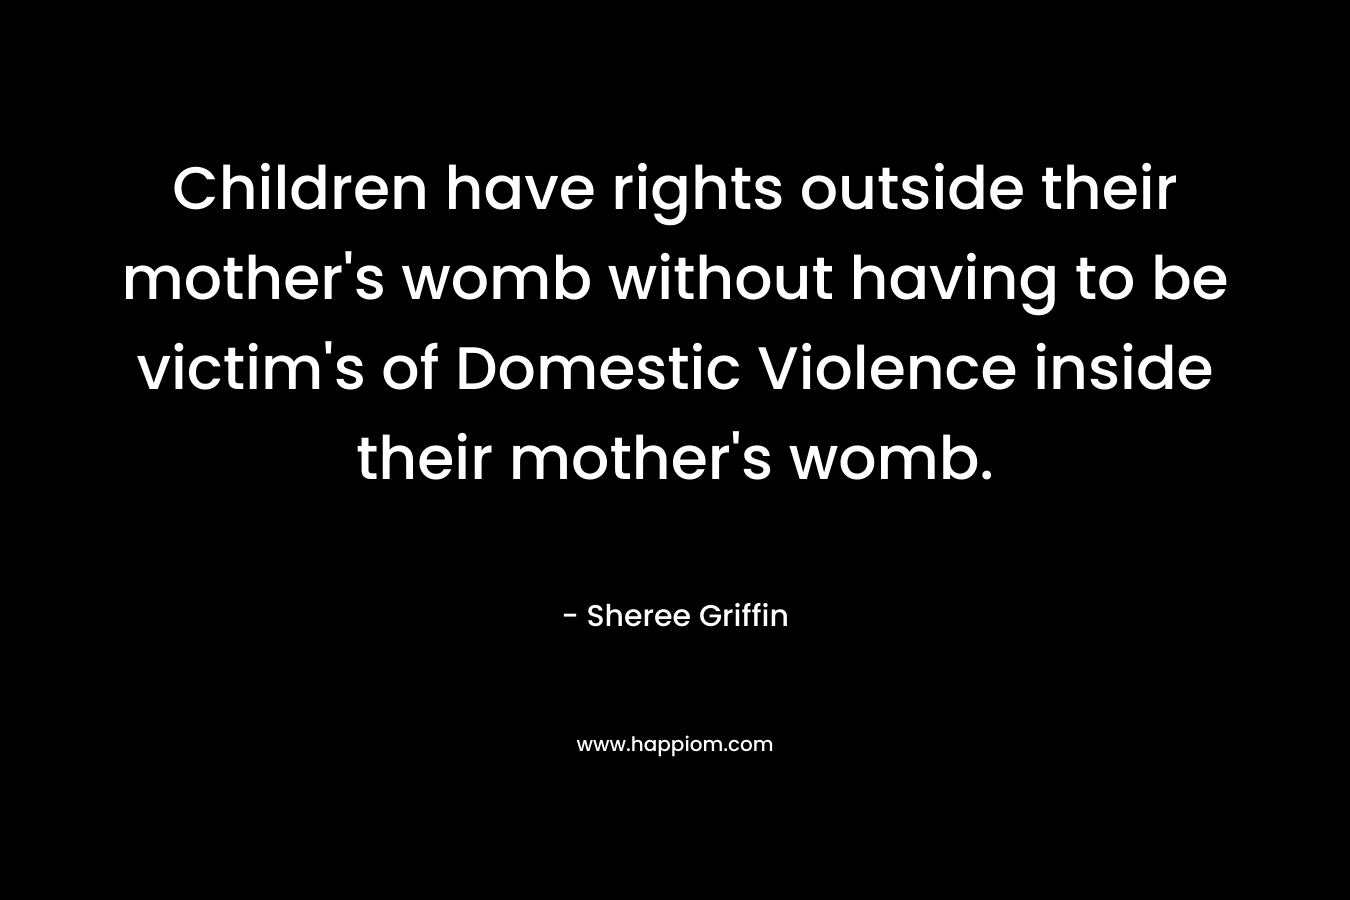 Children have rights outside their mother’s womb without having to be victim’s of Domestic Violence inside their mother’s womb. – Sheree Griffin